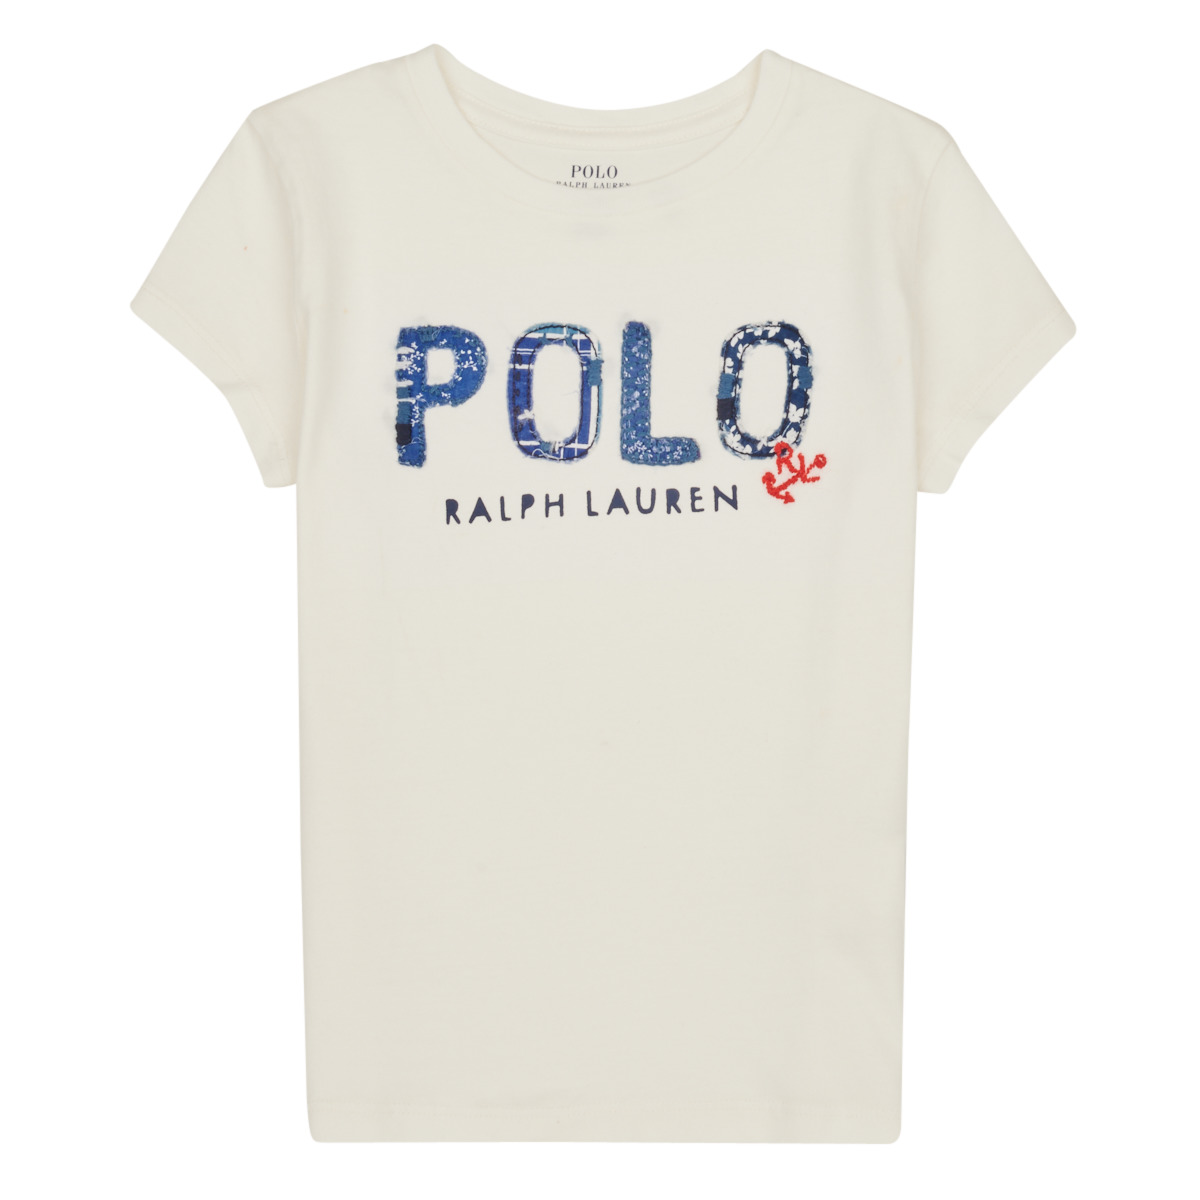 Polo Ralph Lauren Blanc SS POLO TEE-KNIT SHIRTS sLo9vRy8